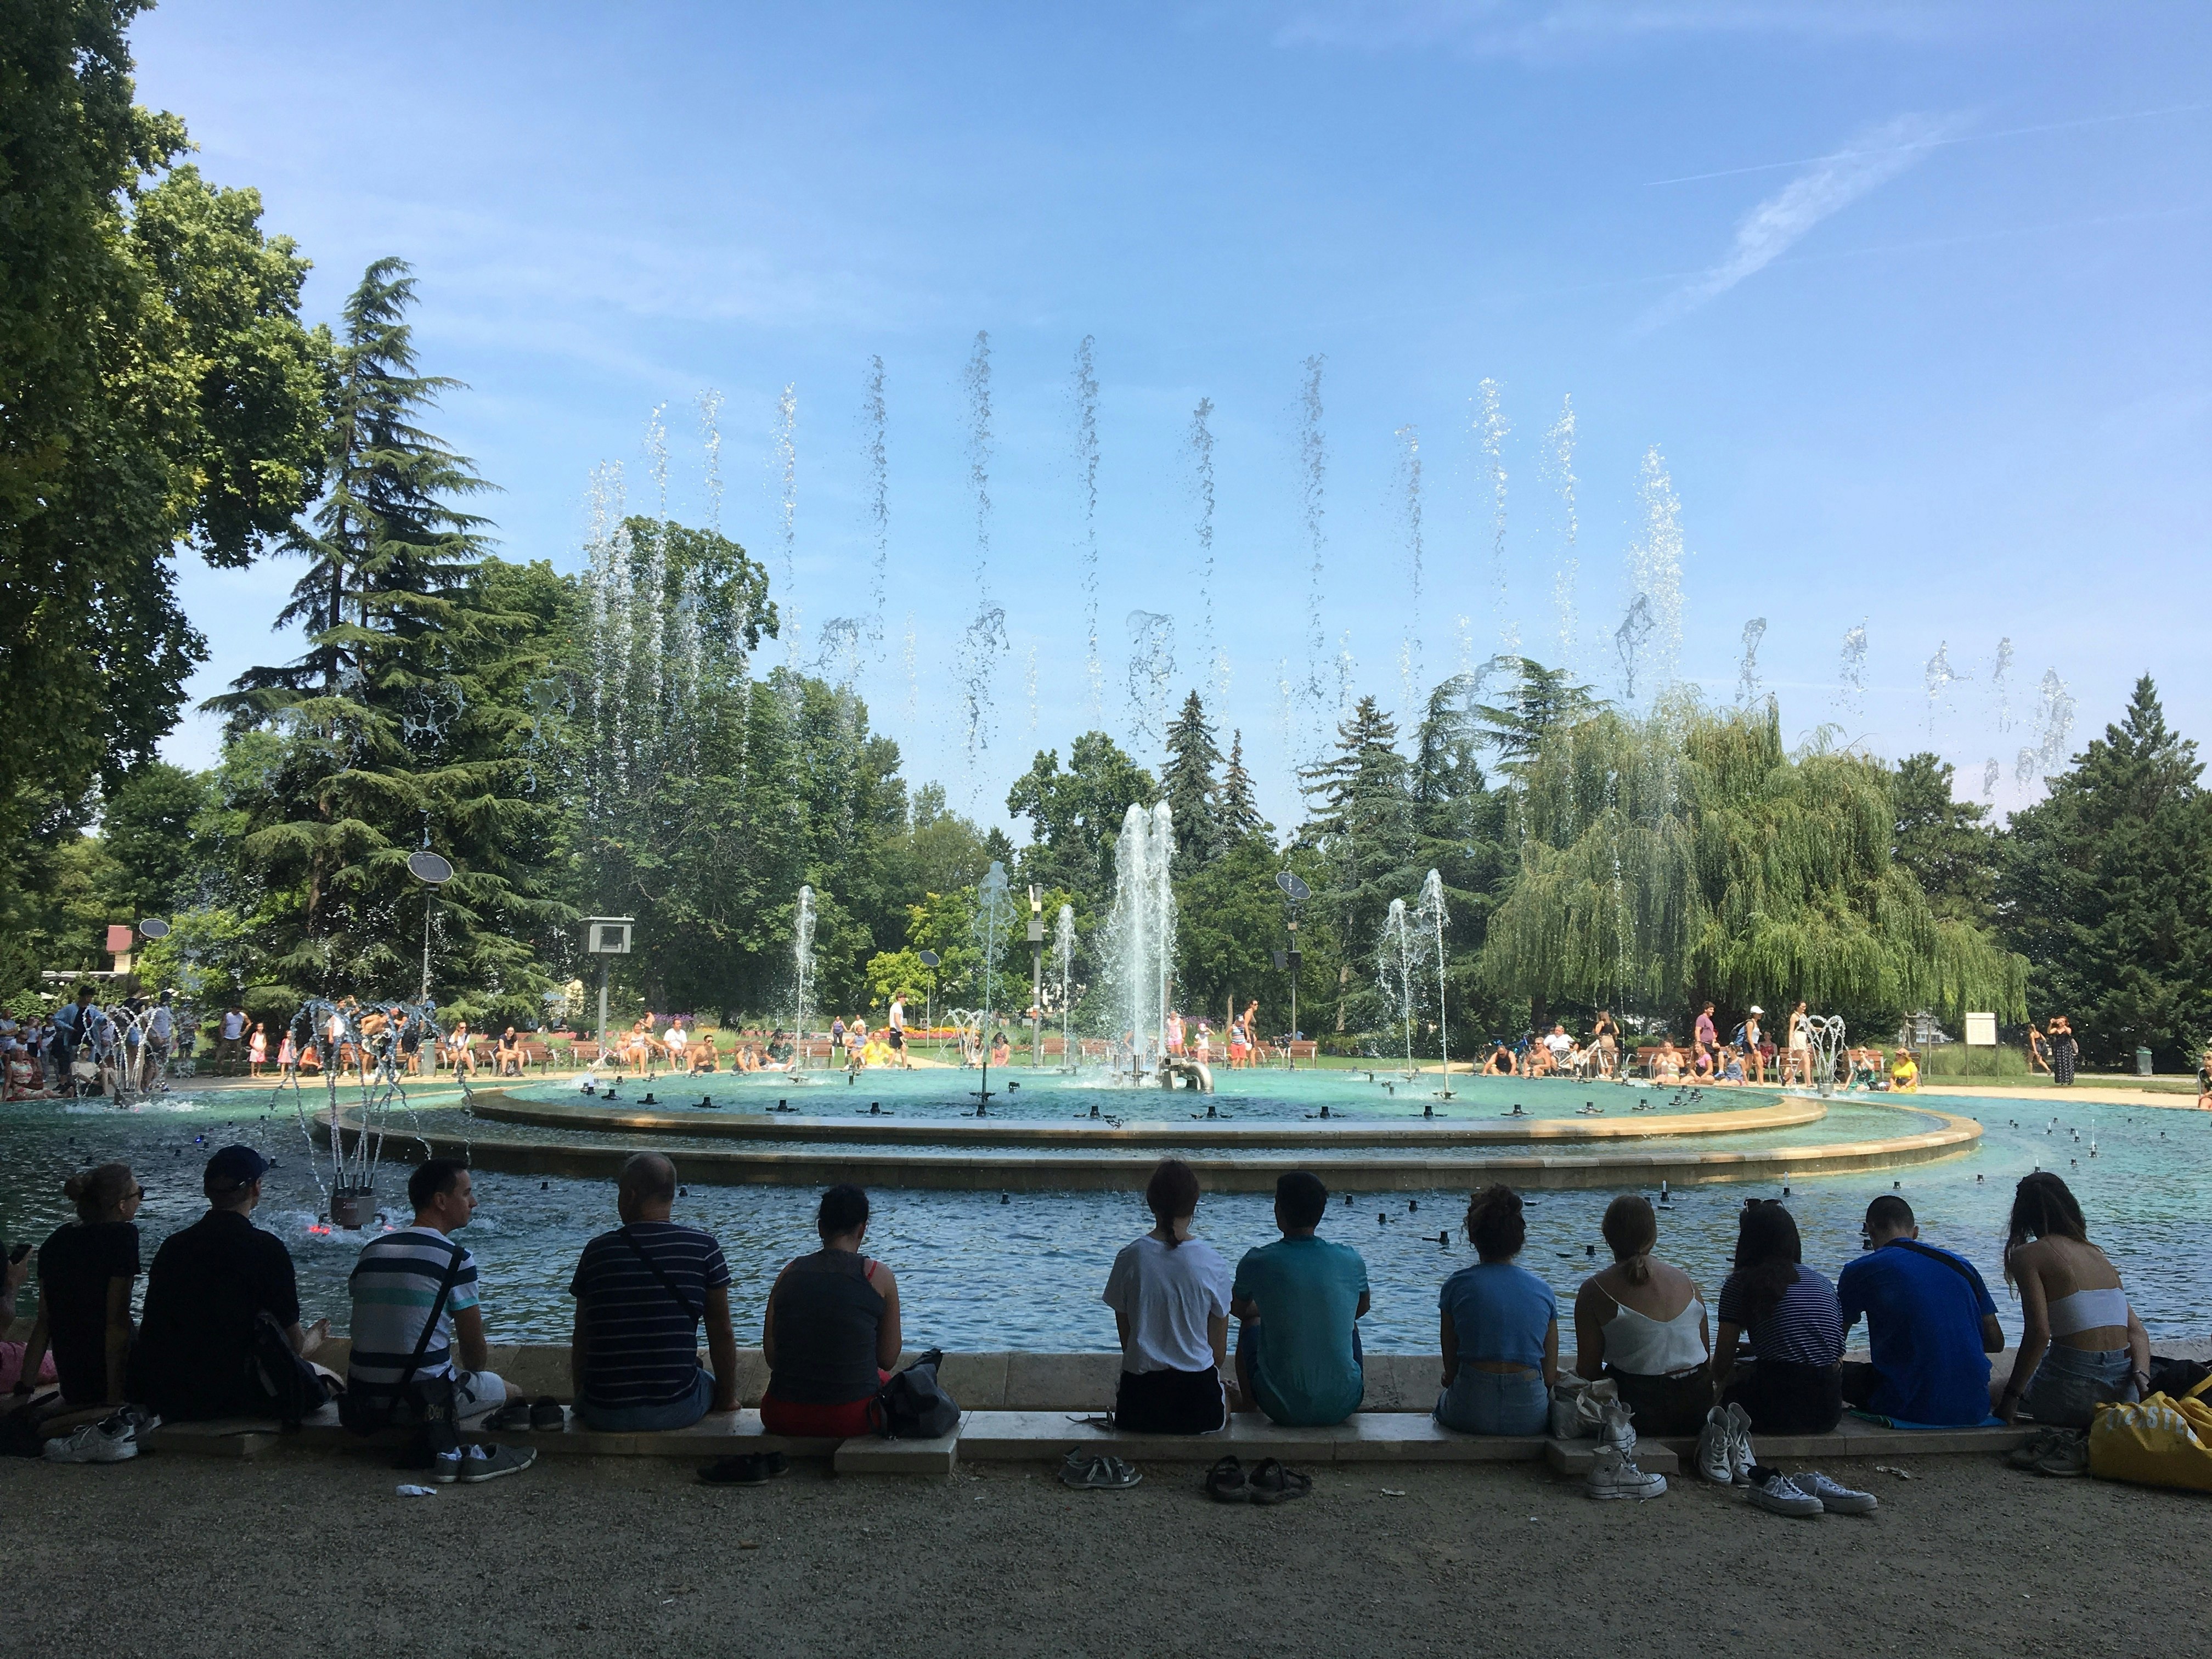 A row of people sit on he ground watching the fountain display on Margaret Island, Budapest. The fountain is shooting jets of water high into the air.